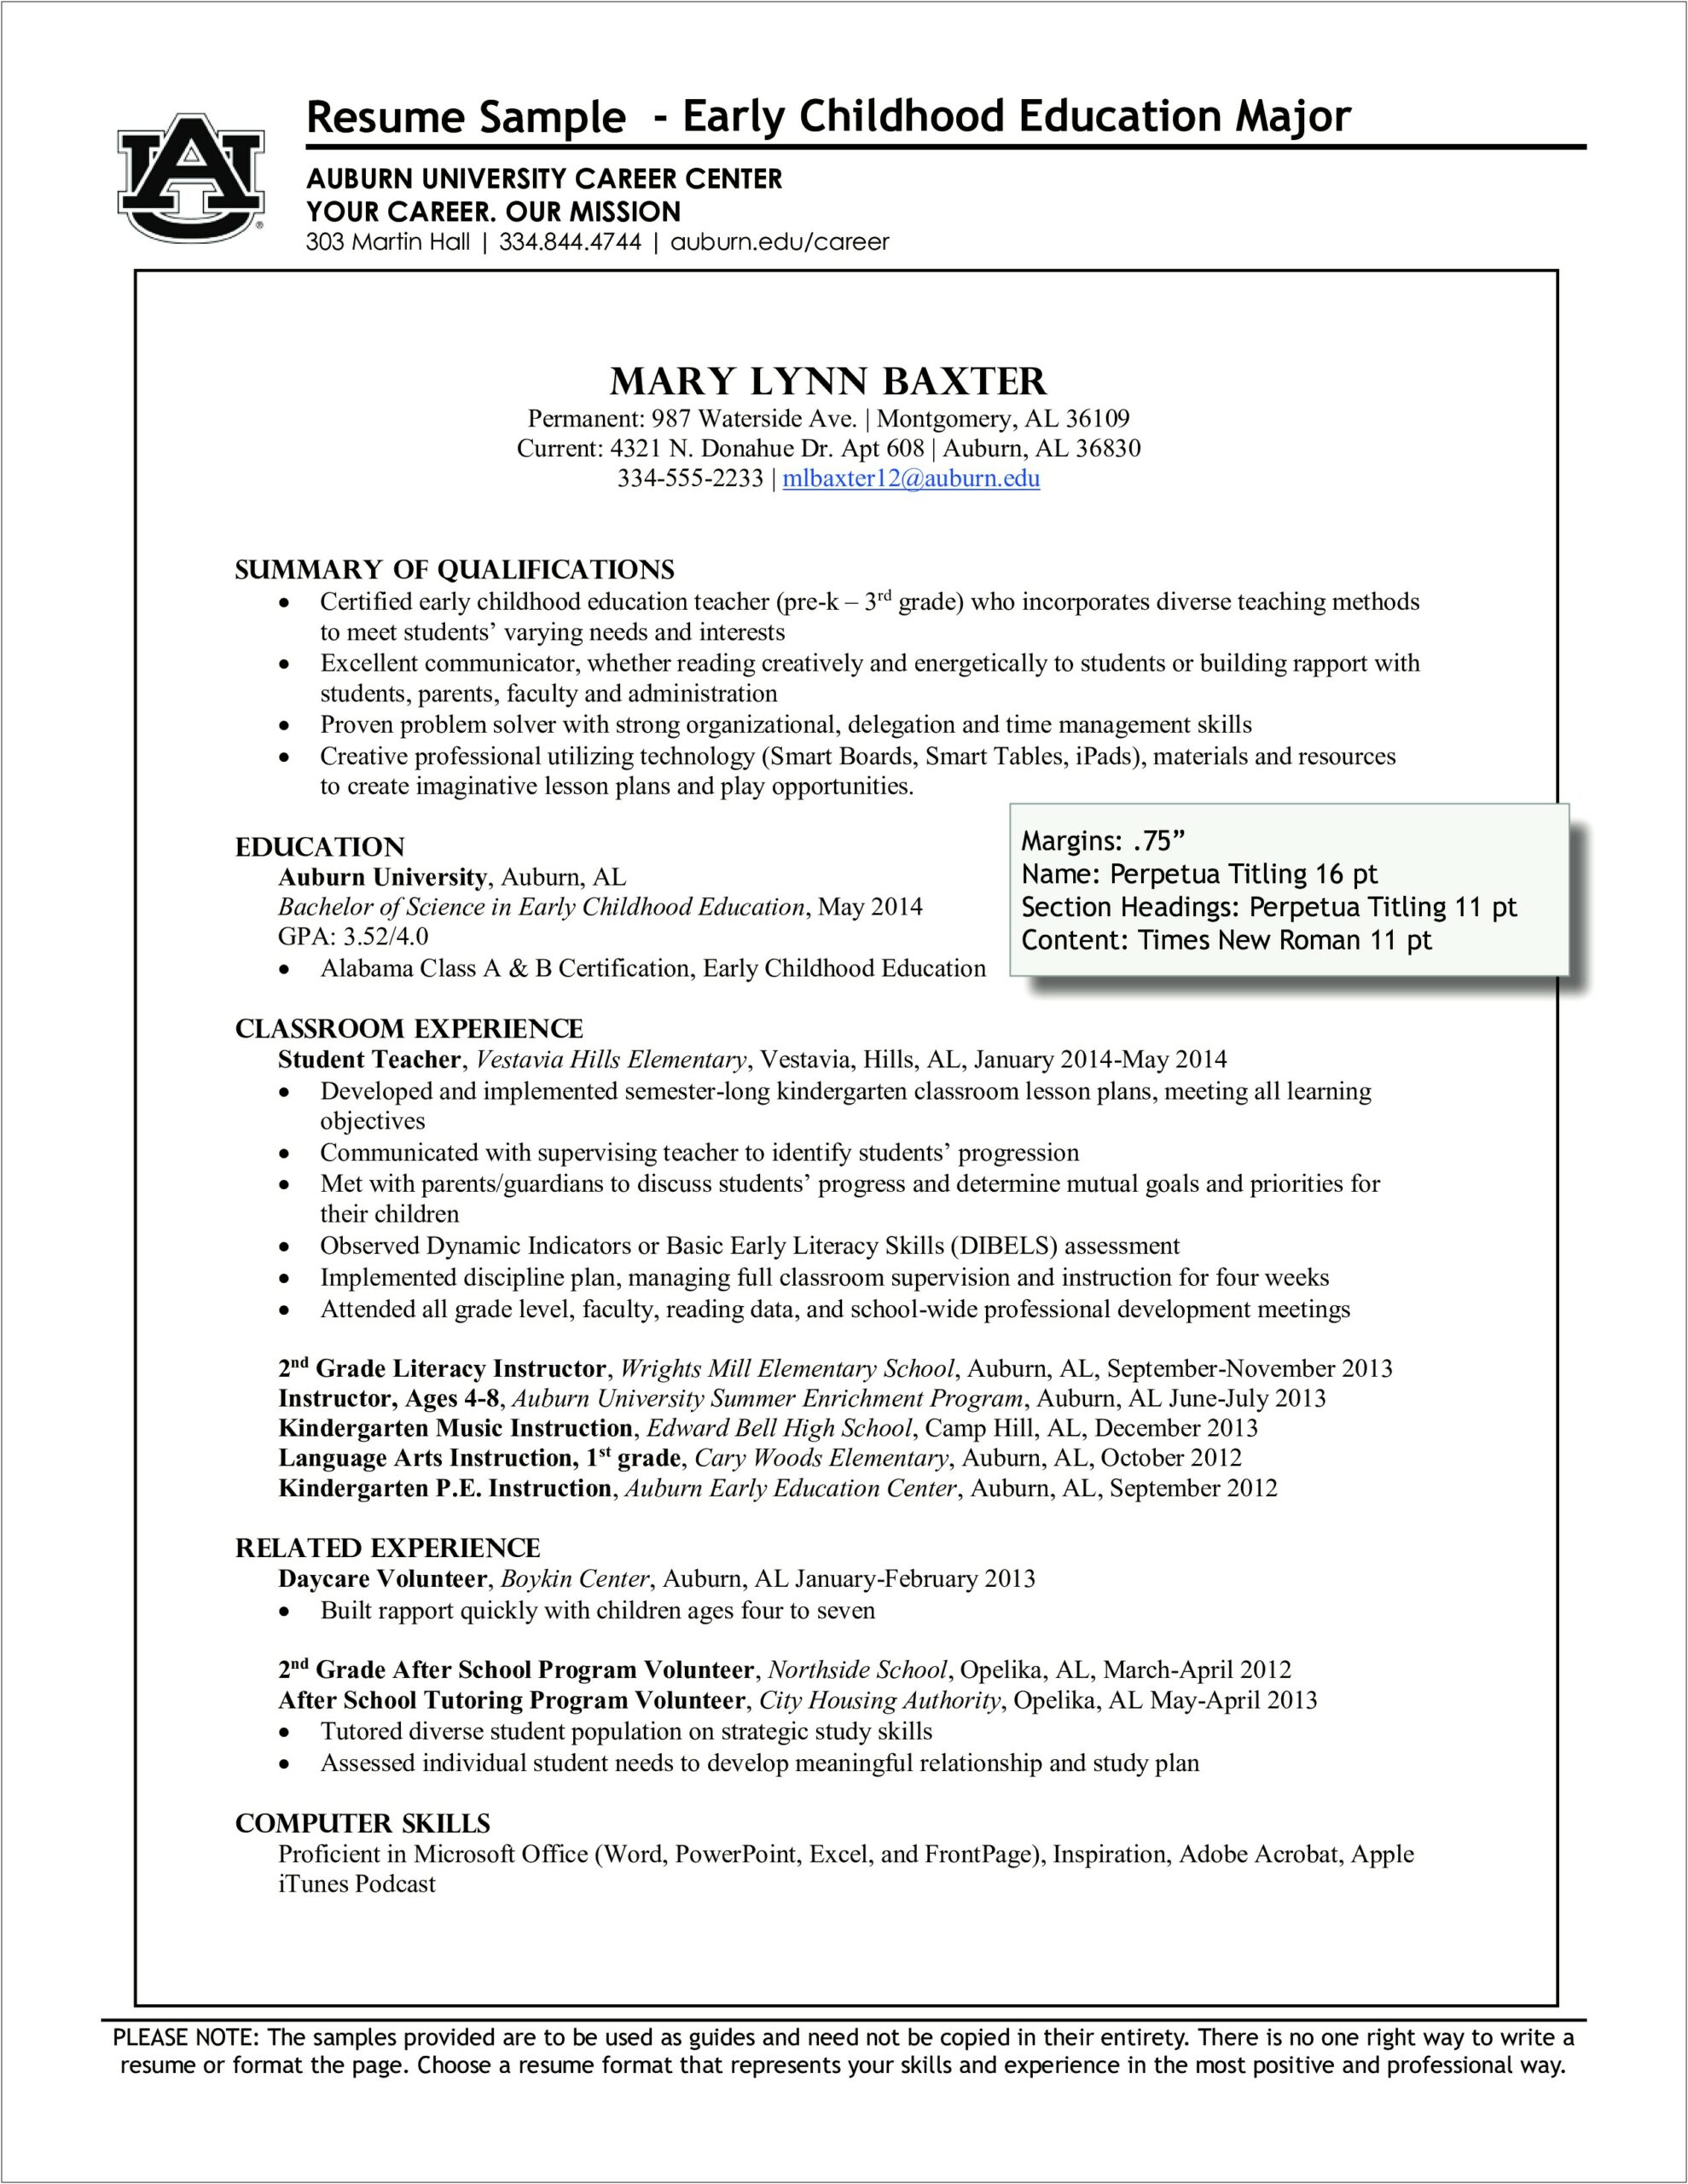 Resume Example For A Home Daycare Owner